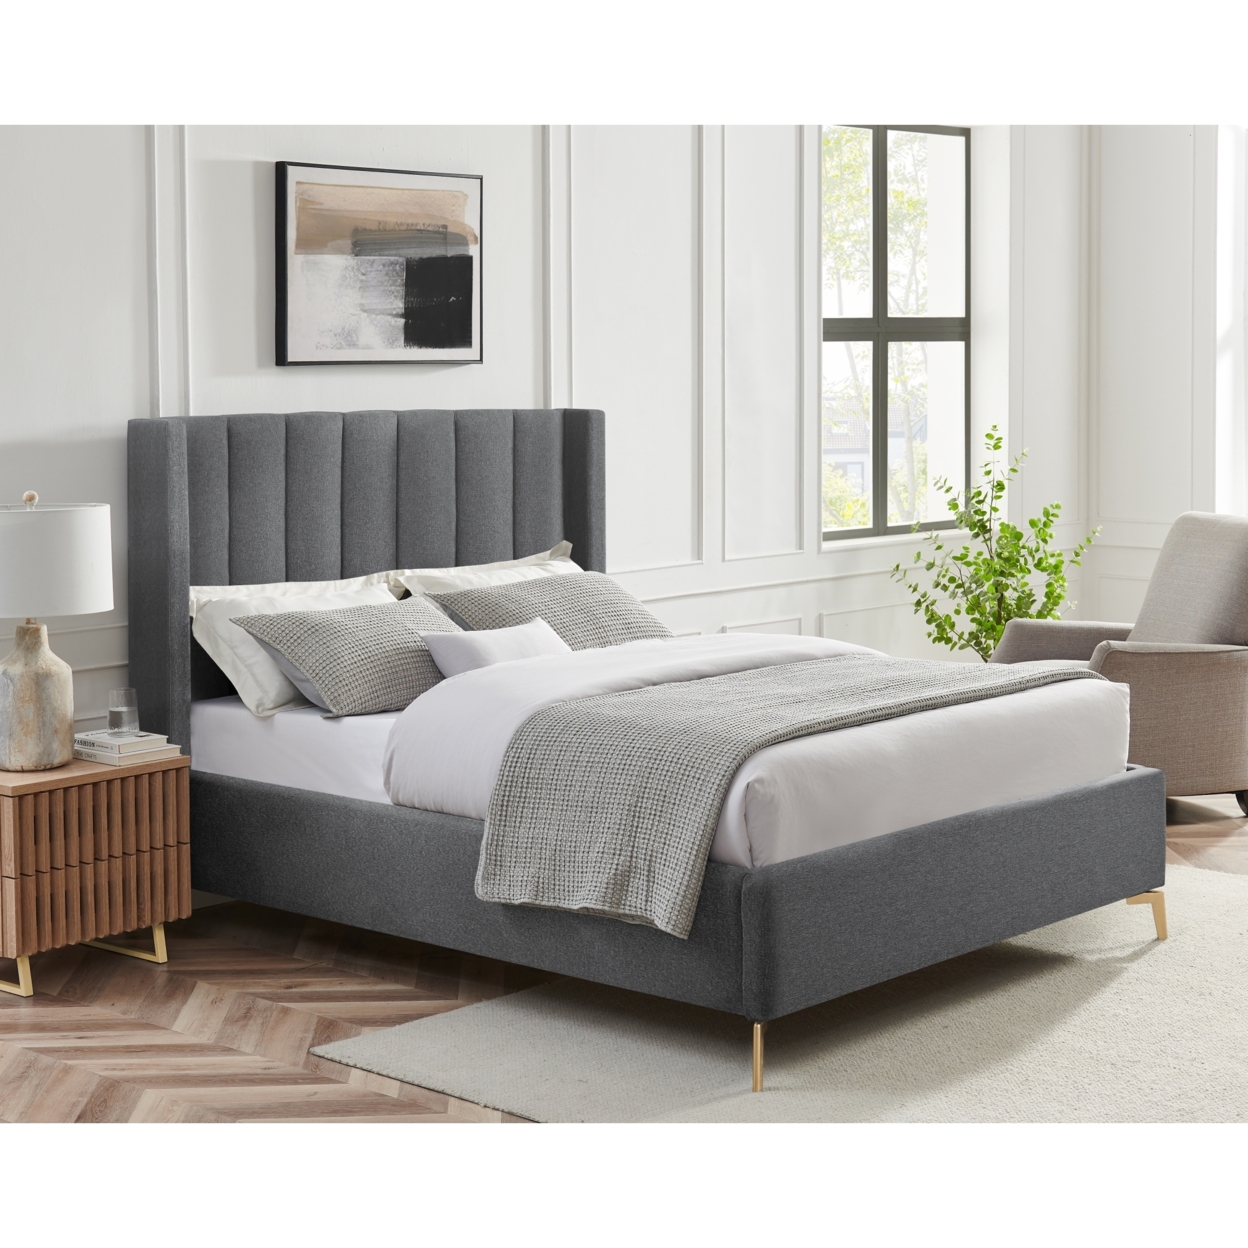 Naeem Bed - Linen Upholstered, Wingback Channel Tufted Headboard, Oblique Legs, Slats Included - Grey, Queen